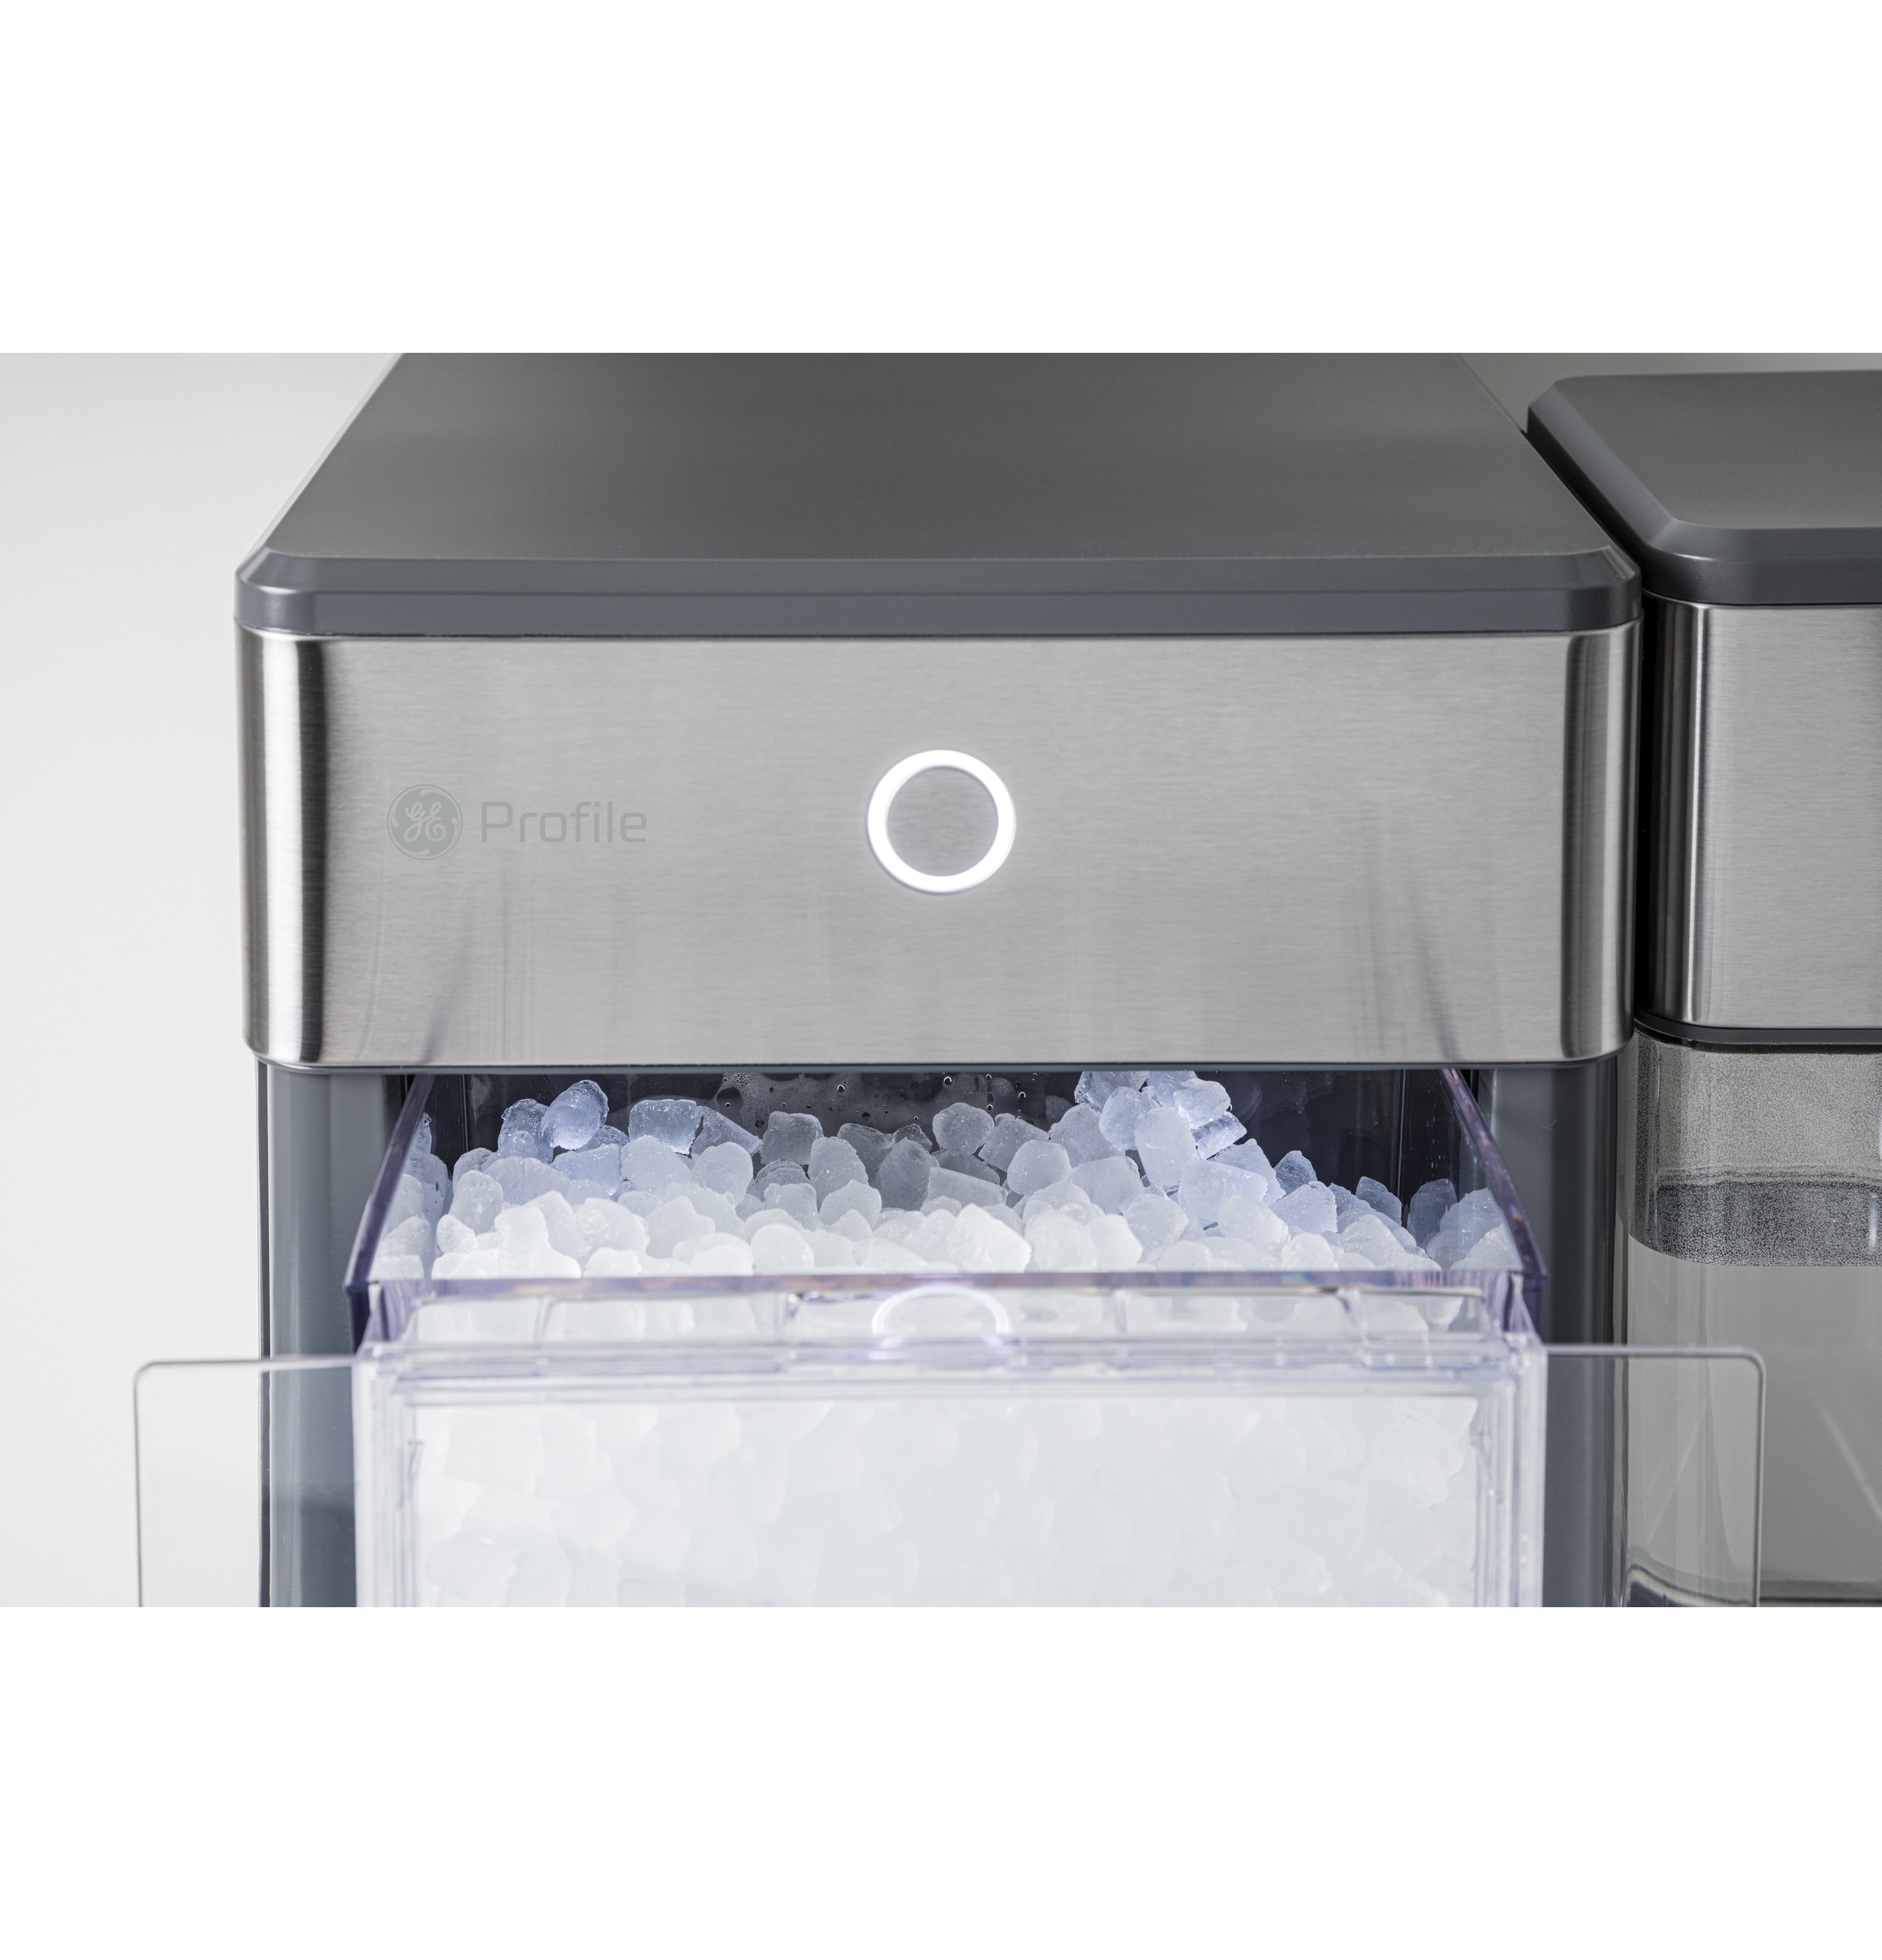 GE Profile™ Opal™ Nugget Ice Maker with Side Tank, Countertop Icemaker, Stainless Steel - image 10 of 11